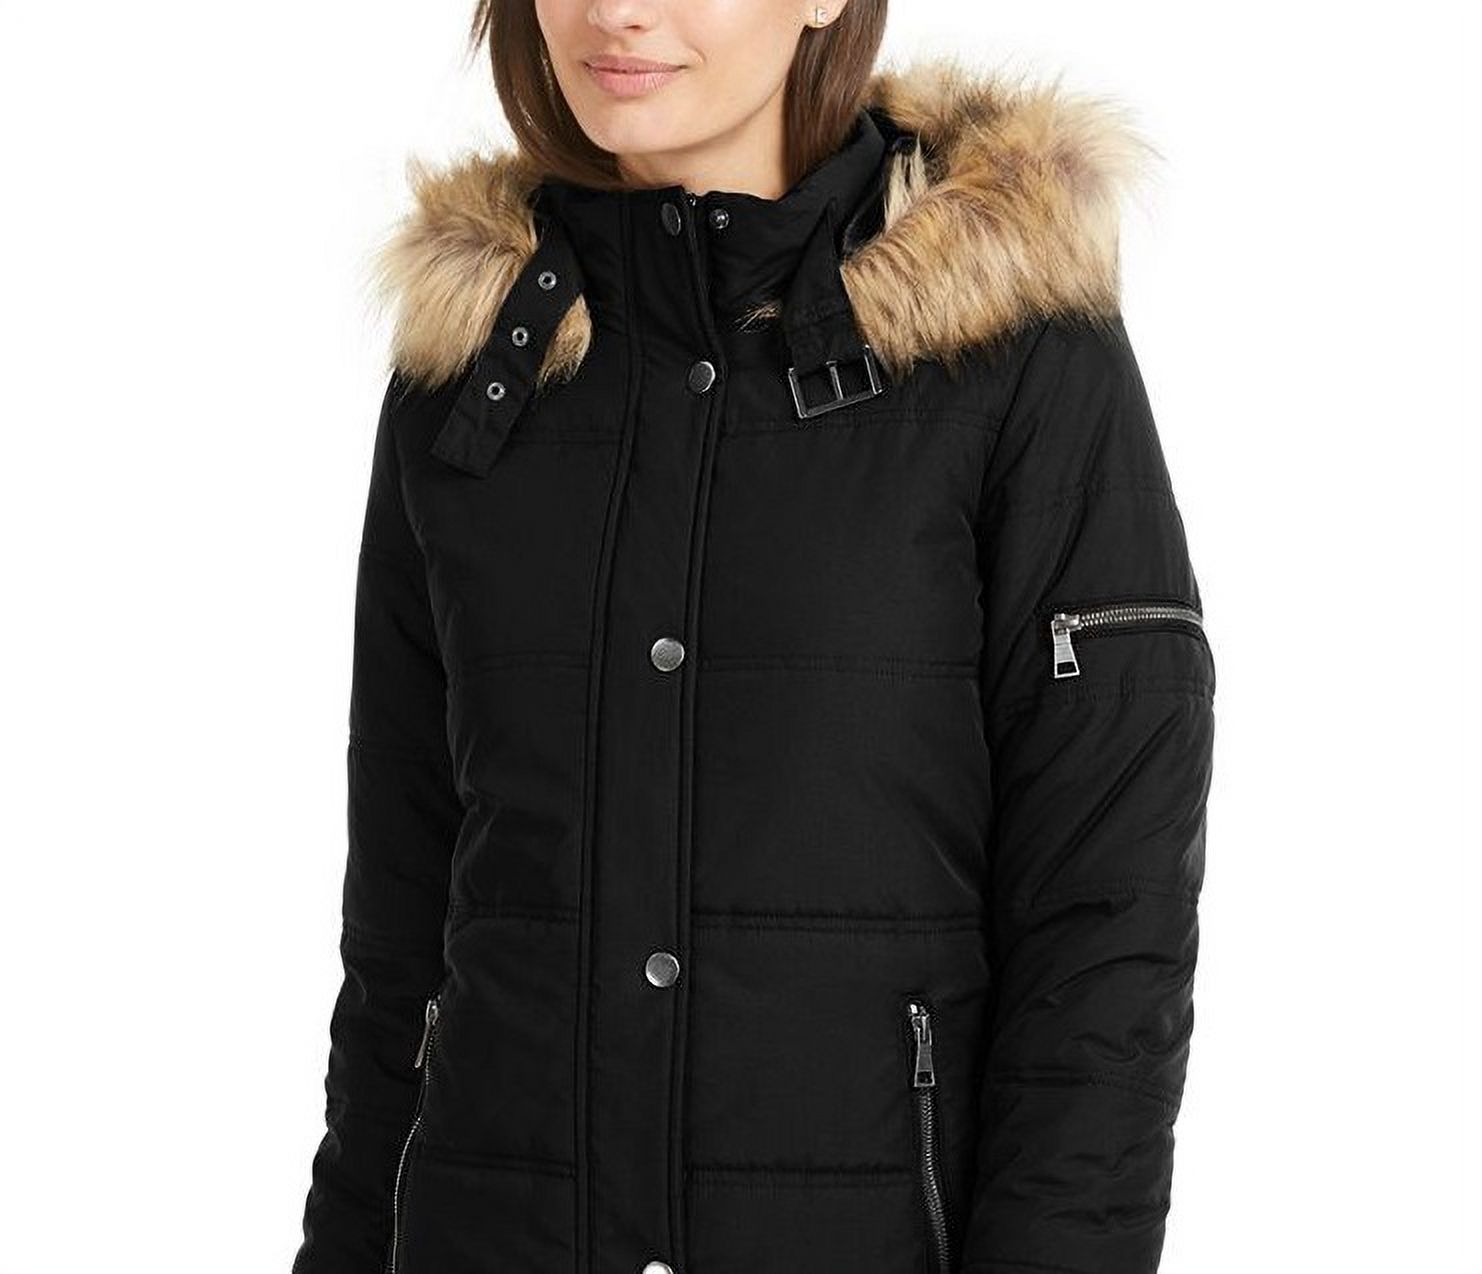 MARALYN & ME Womens Black Faux Fur Pocketed Hooded Zippered Puffer Winter Jacket Coat Juniors XS - image 2 of 3